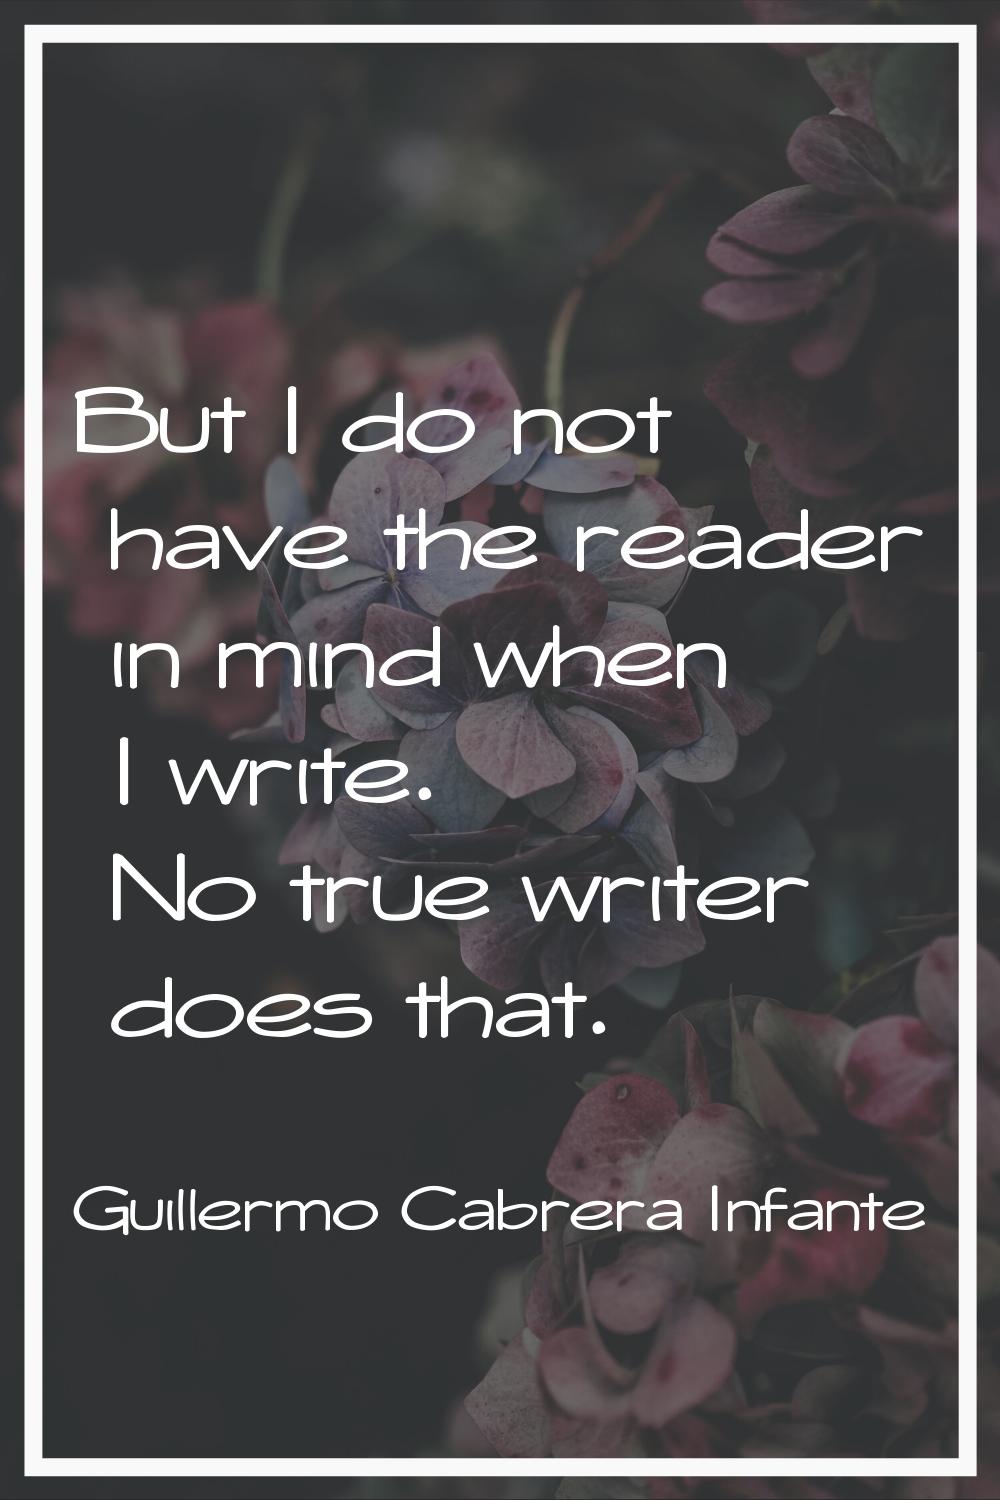 But I do not have the reader in mind when I write. No true writer does that.